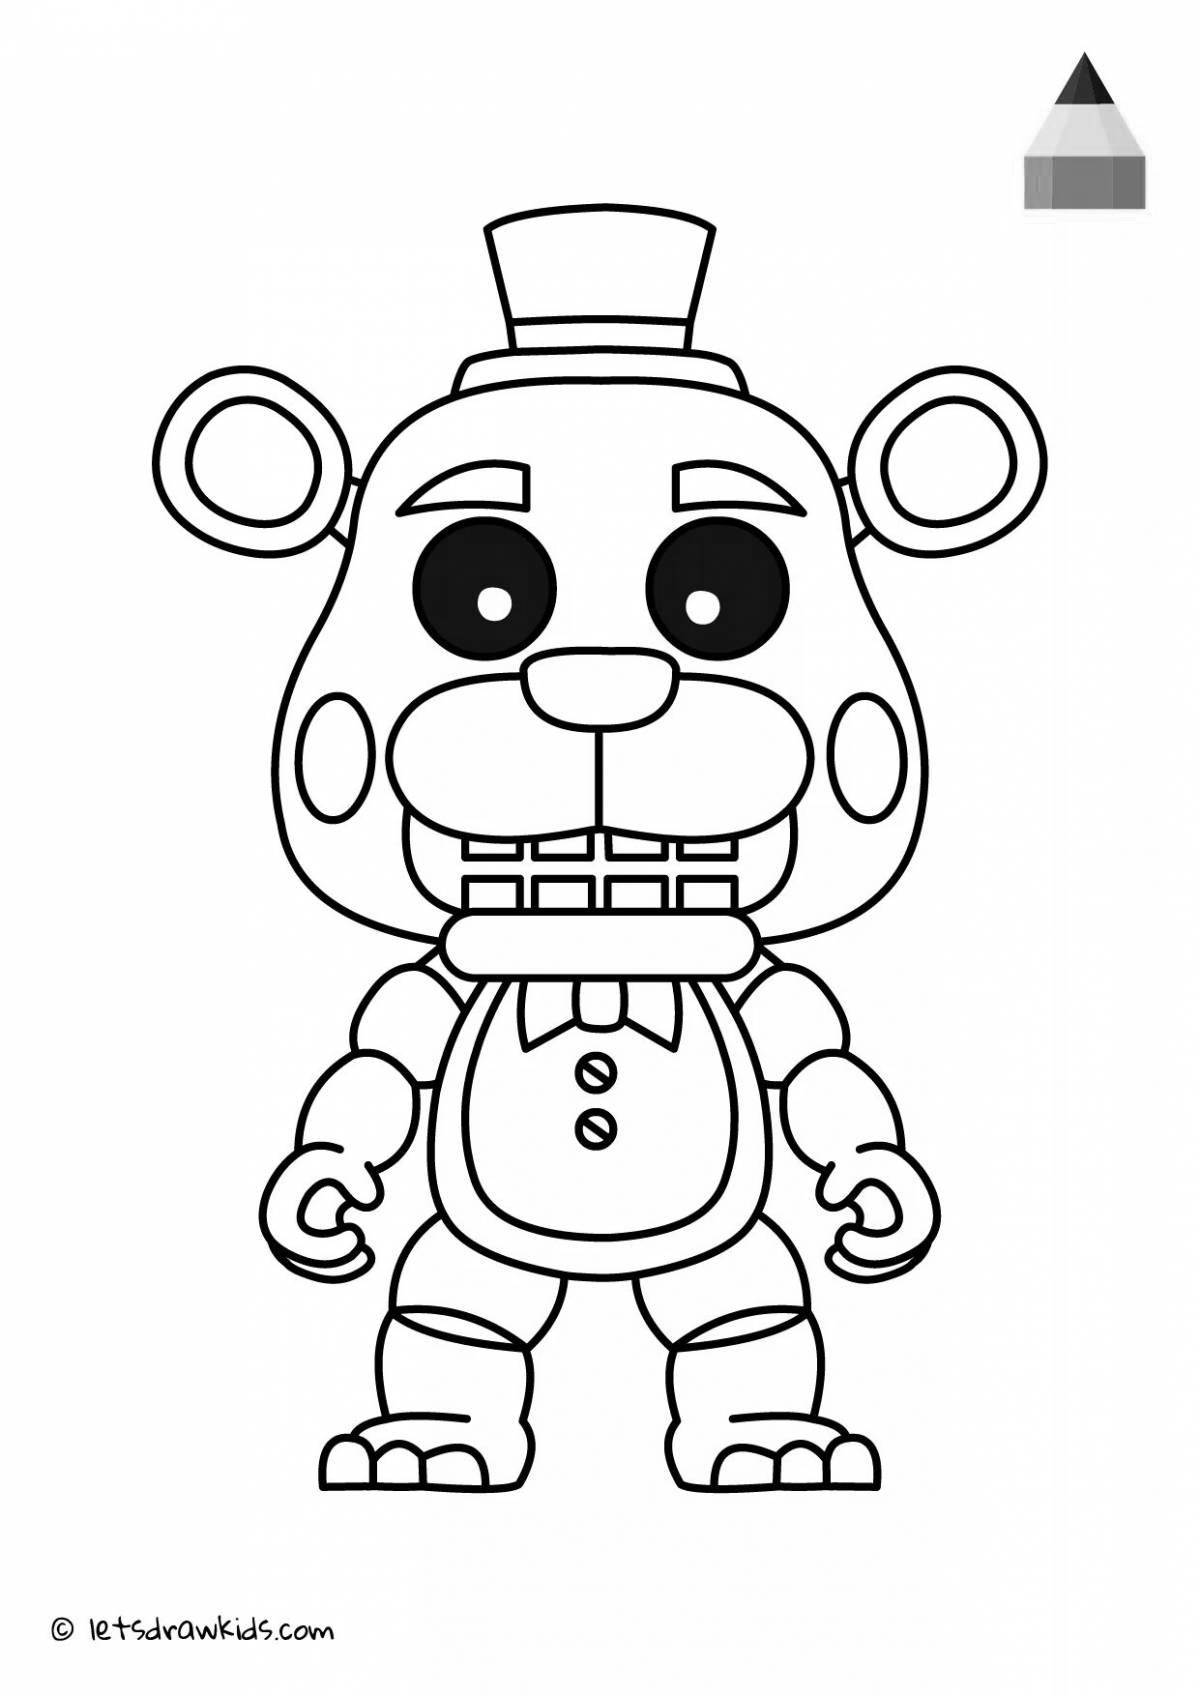 Freddy fighttime bright coloring